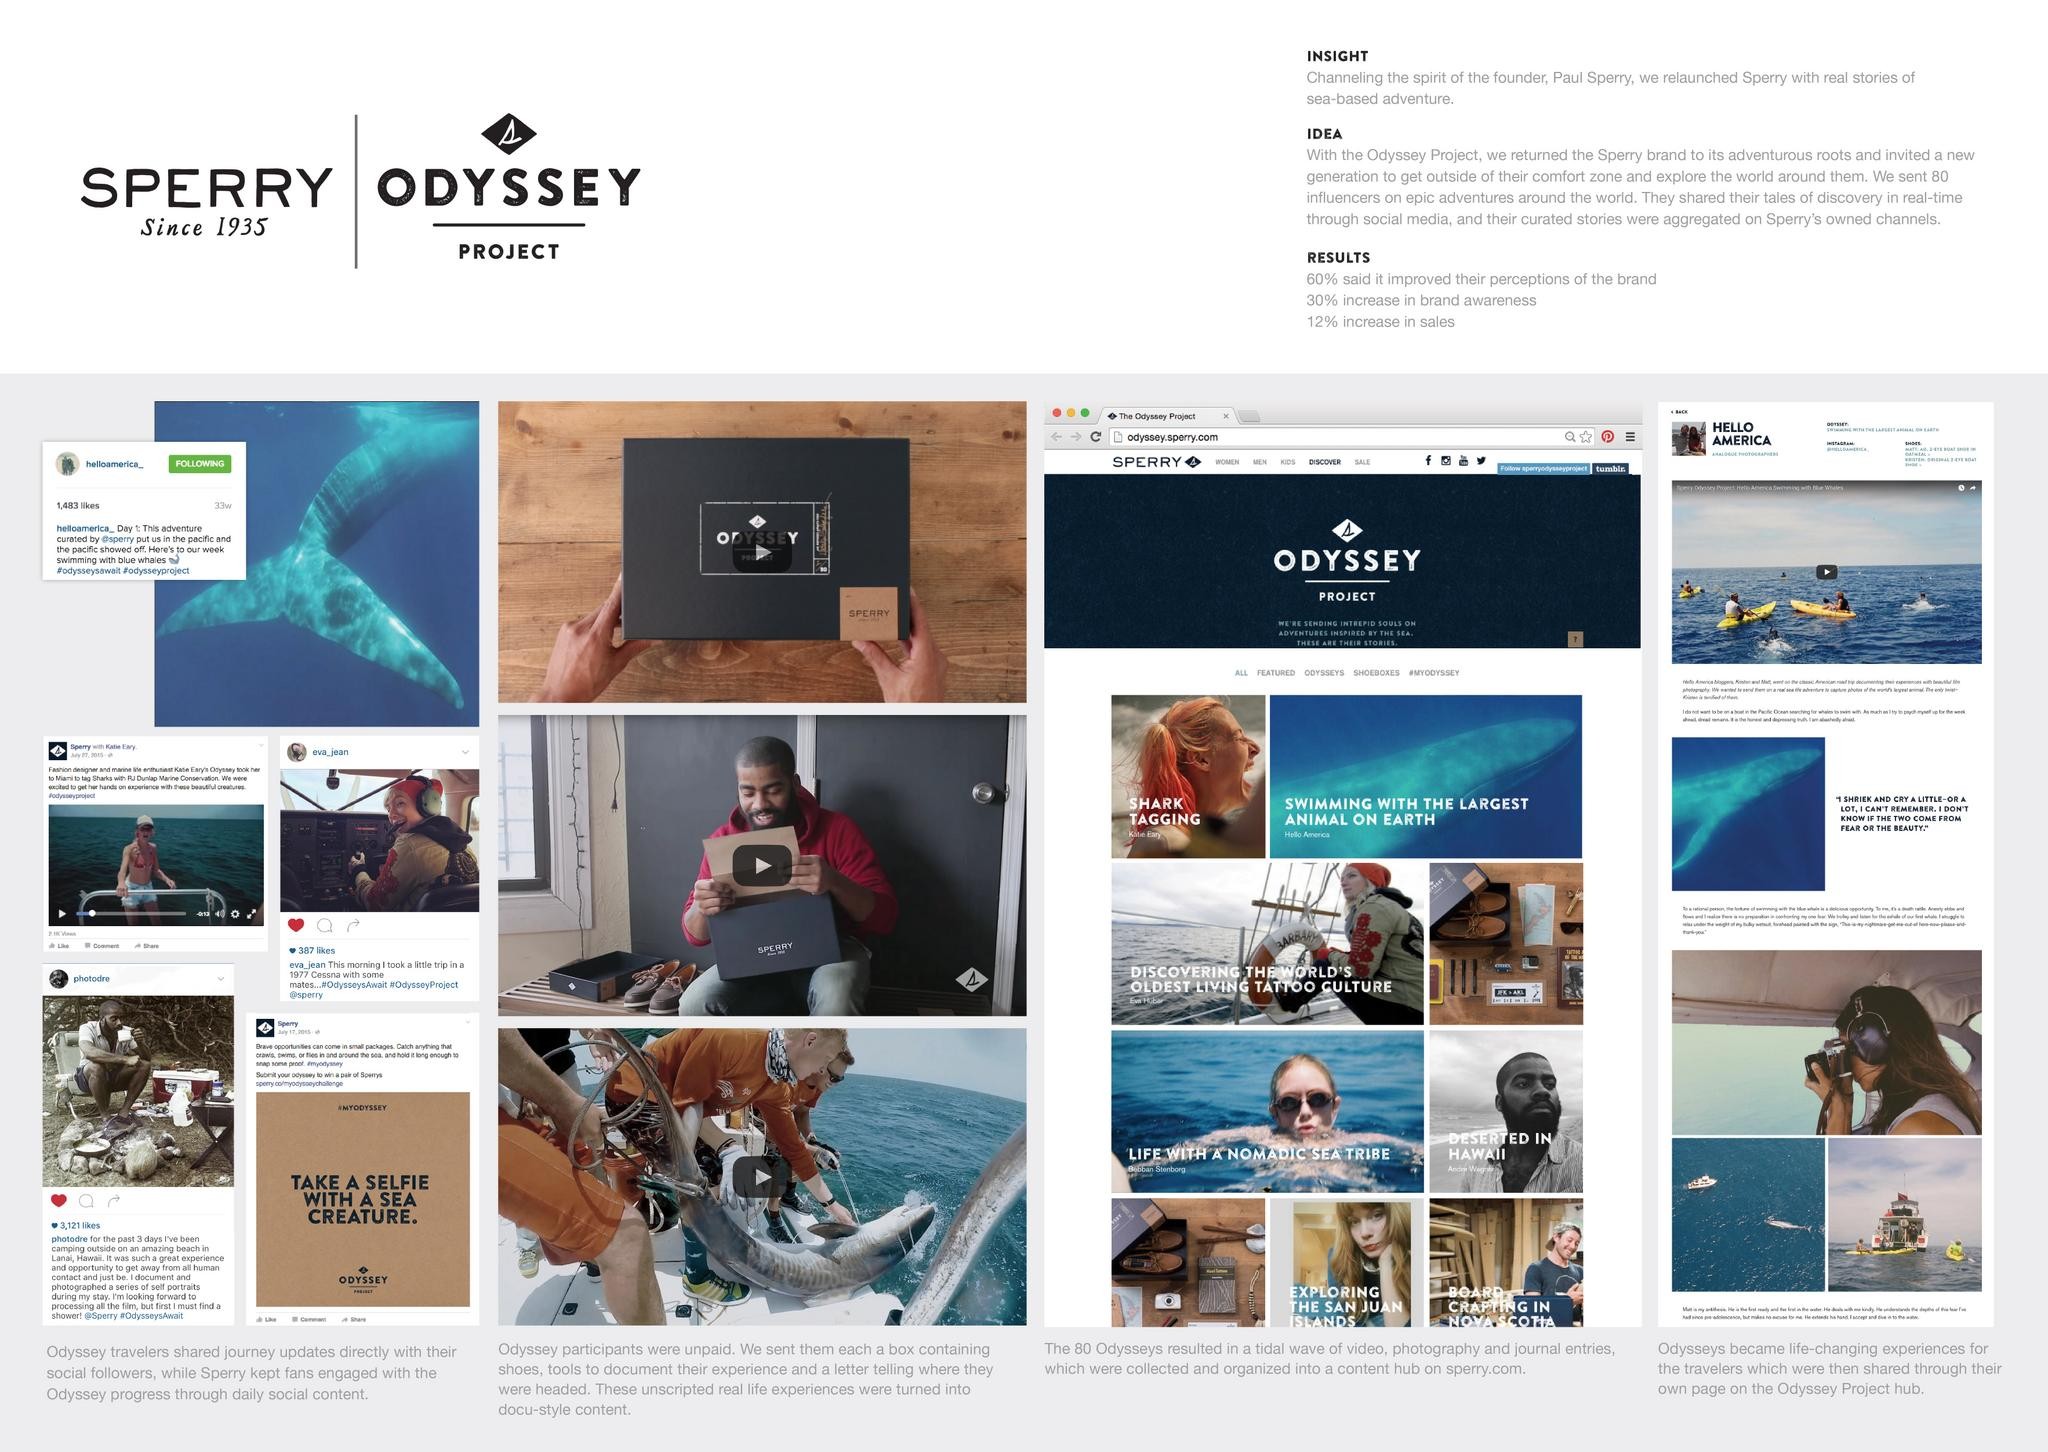 ODYSSEY PROJECT